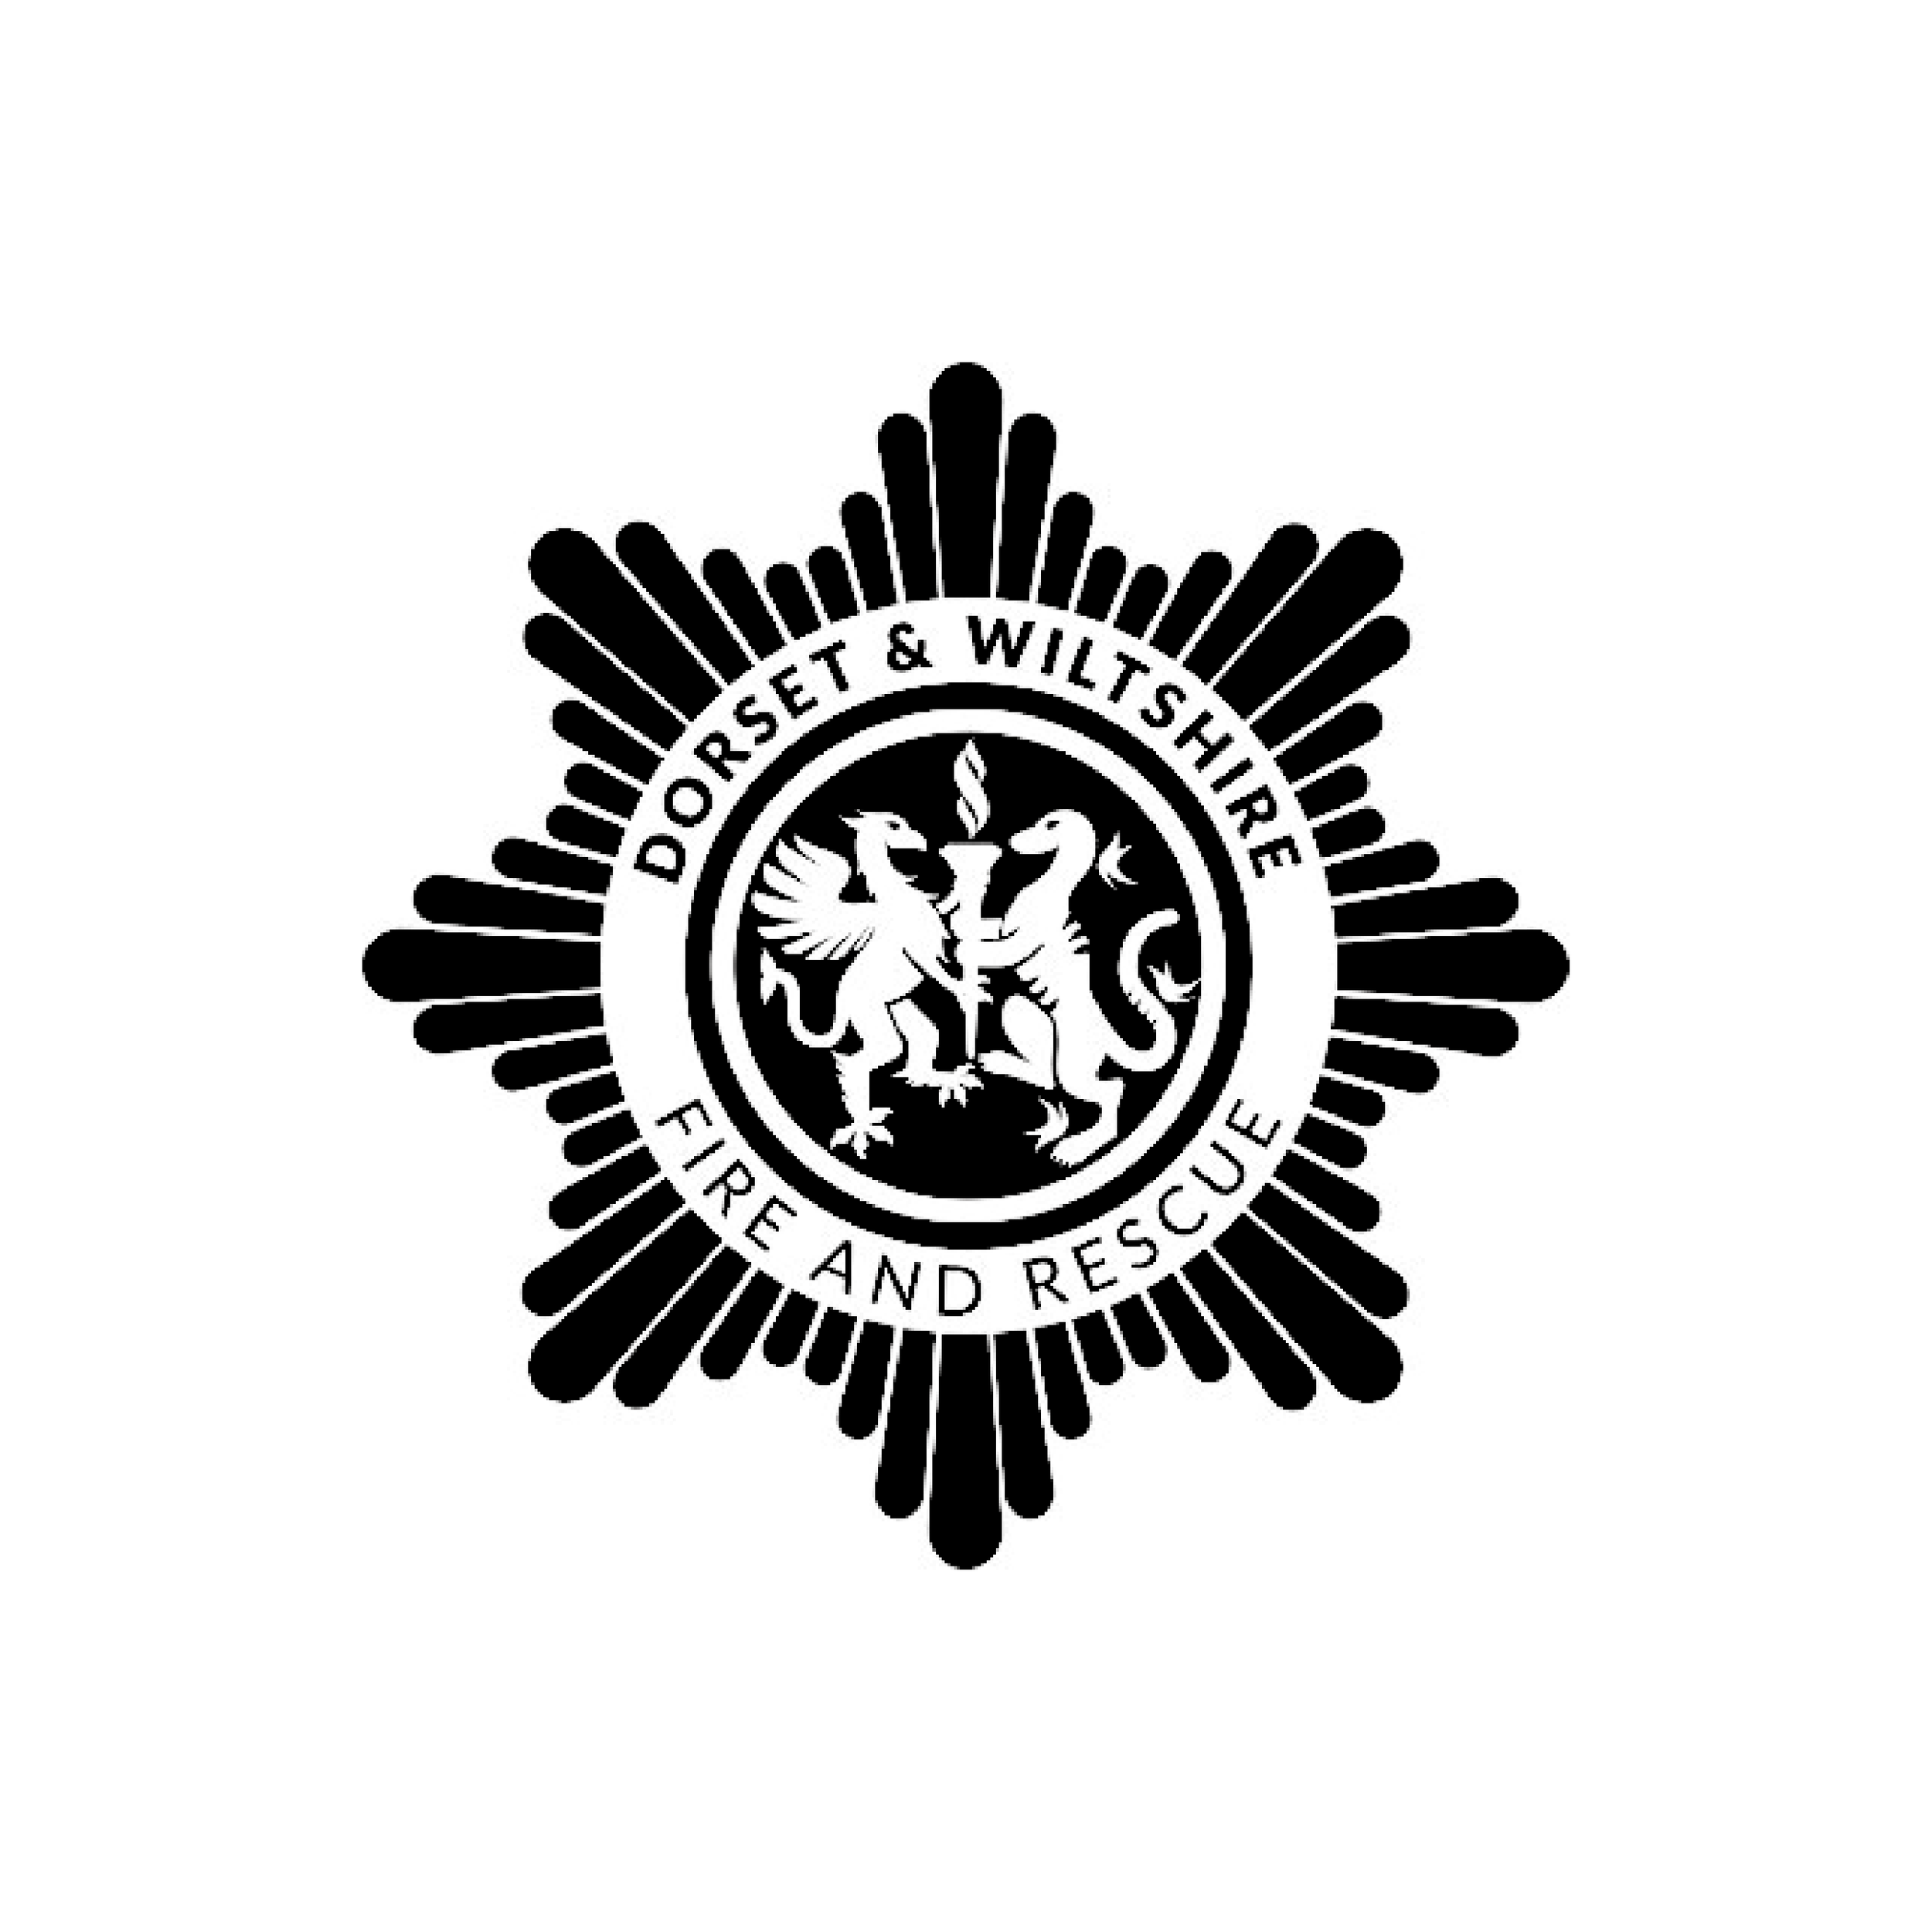 Dorset and Wiltshire Fire and Rescue Service